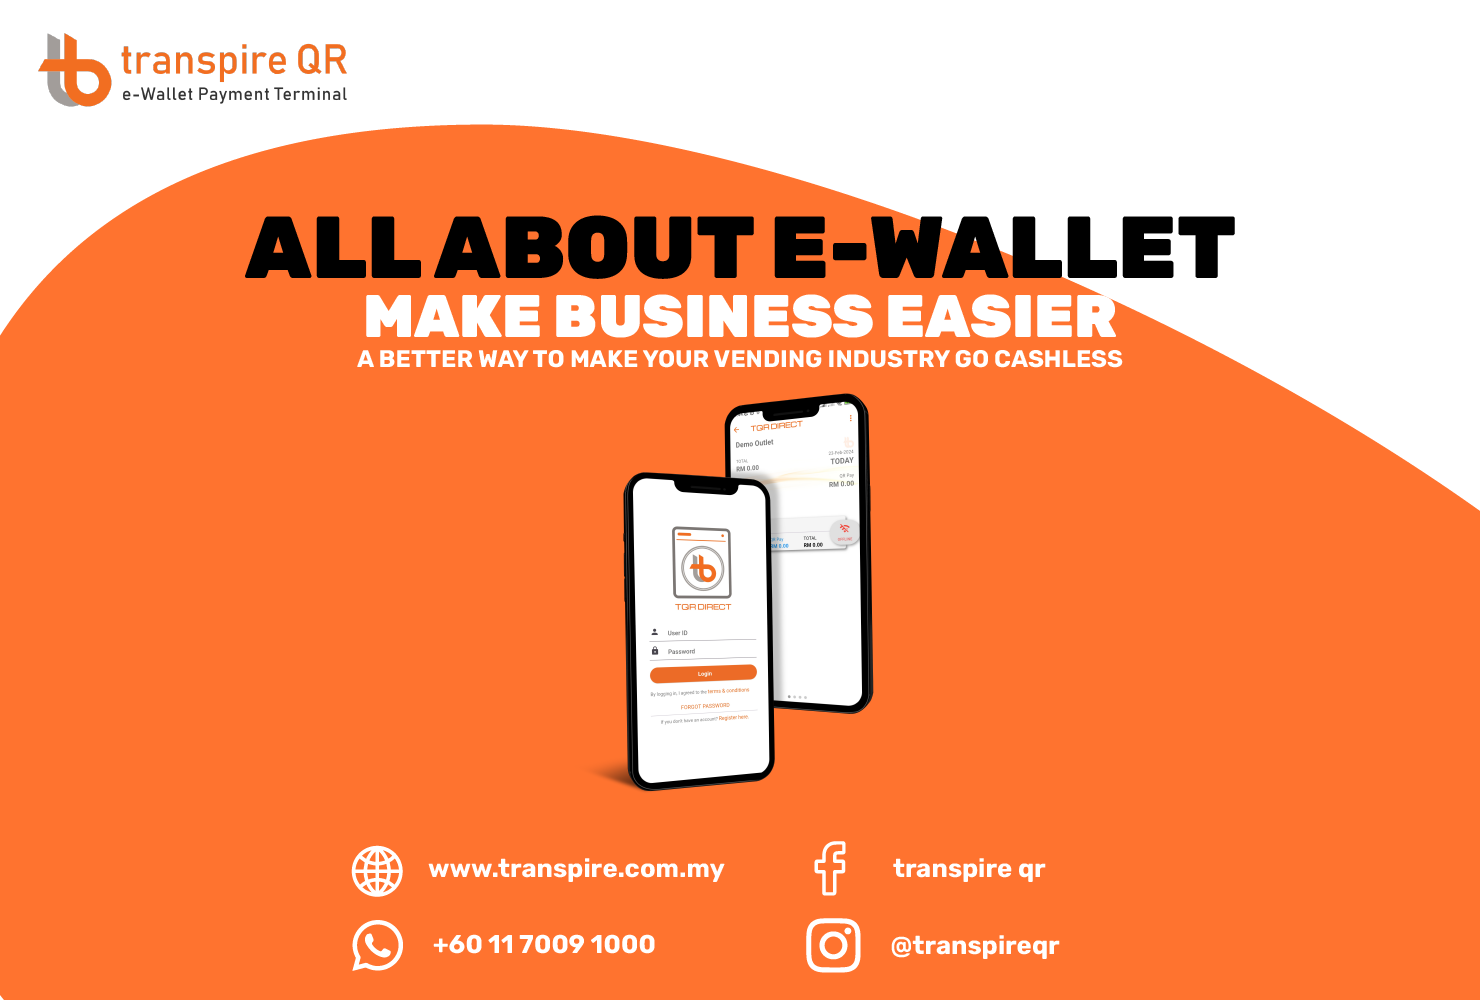 E-wallets make vending machines easier to use by allowing cashless payments, improving convenience for customers.